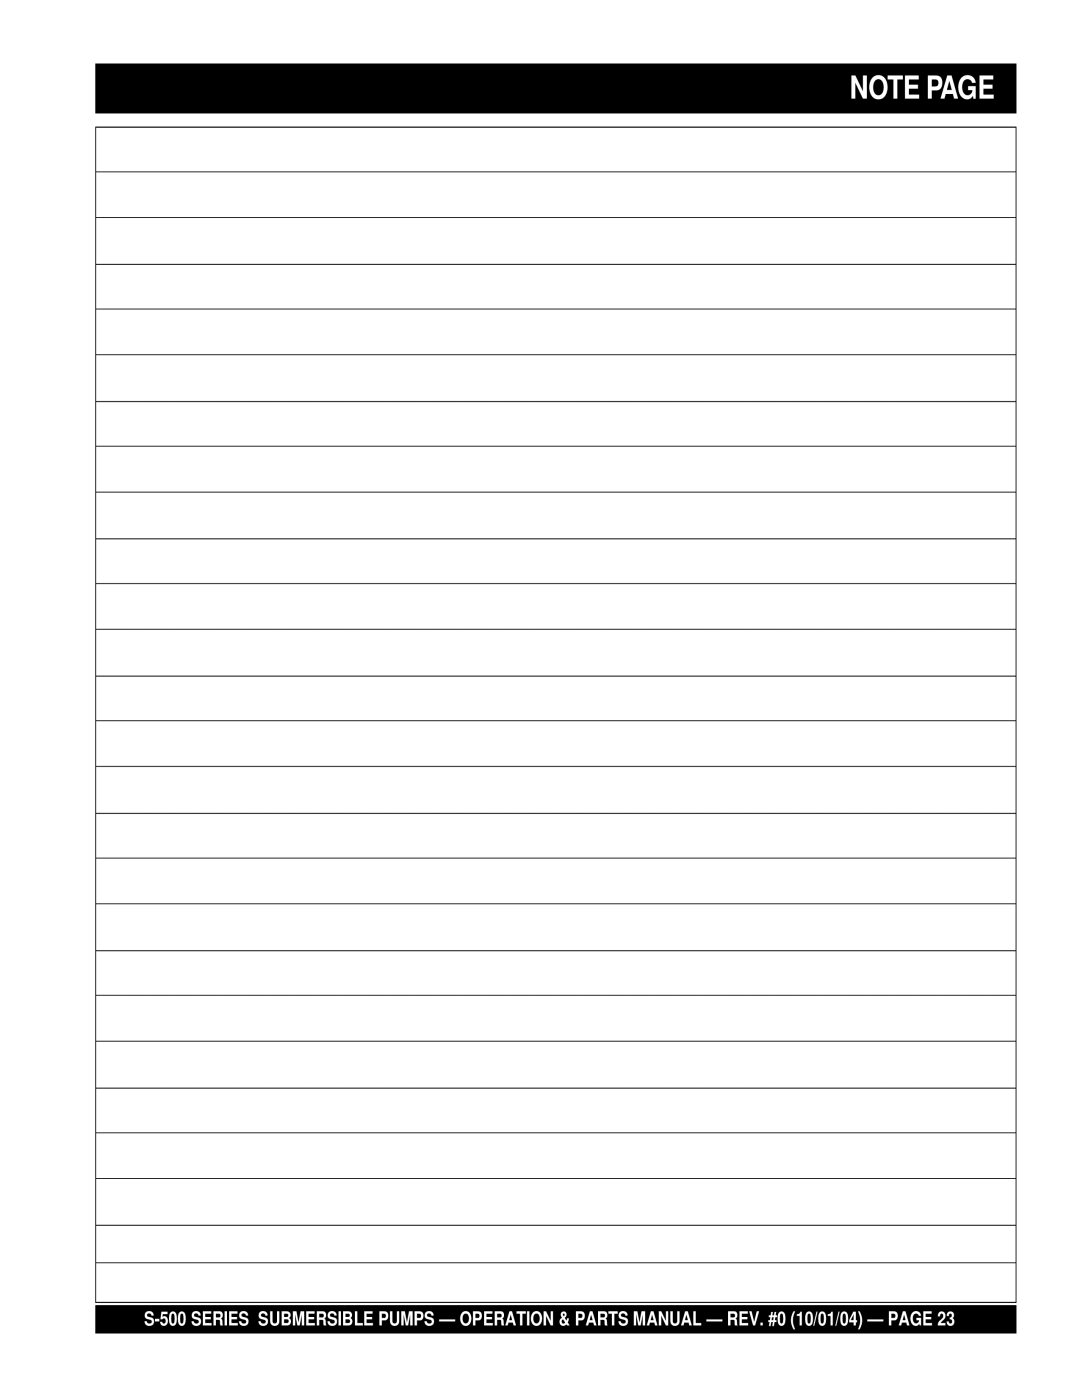 Multiquip S-500 manual Note Page 